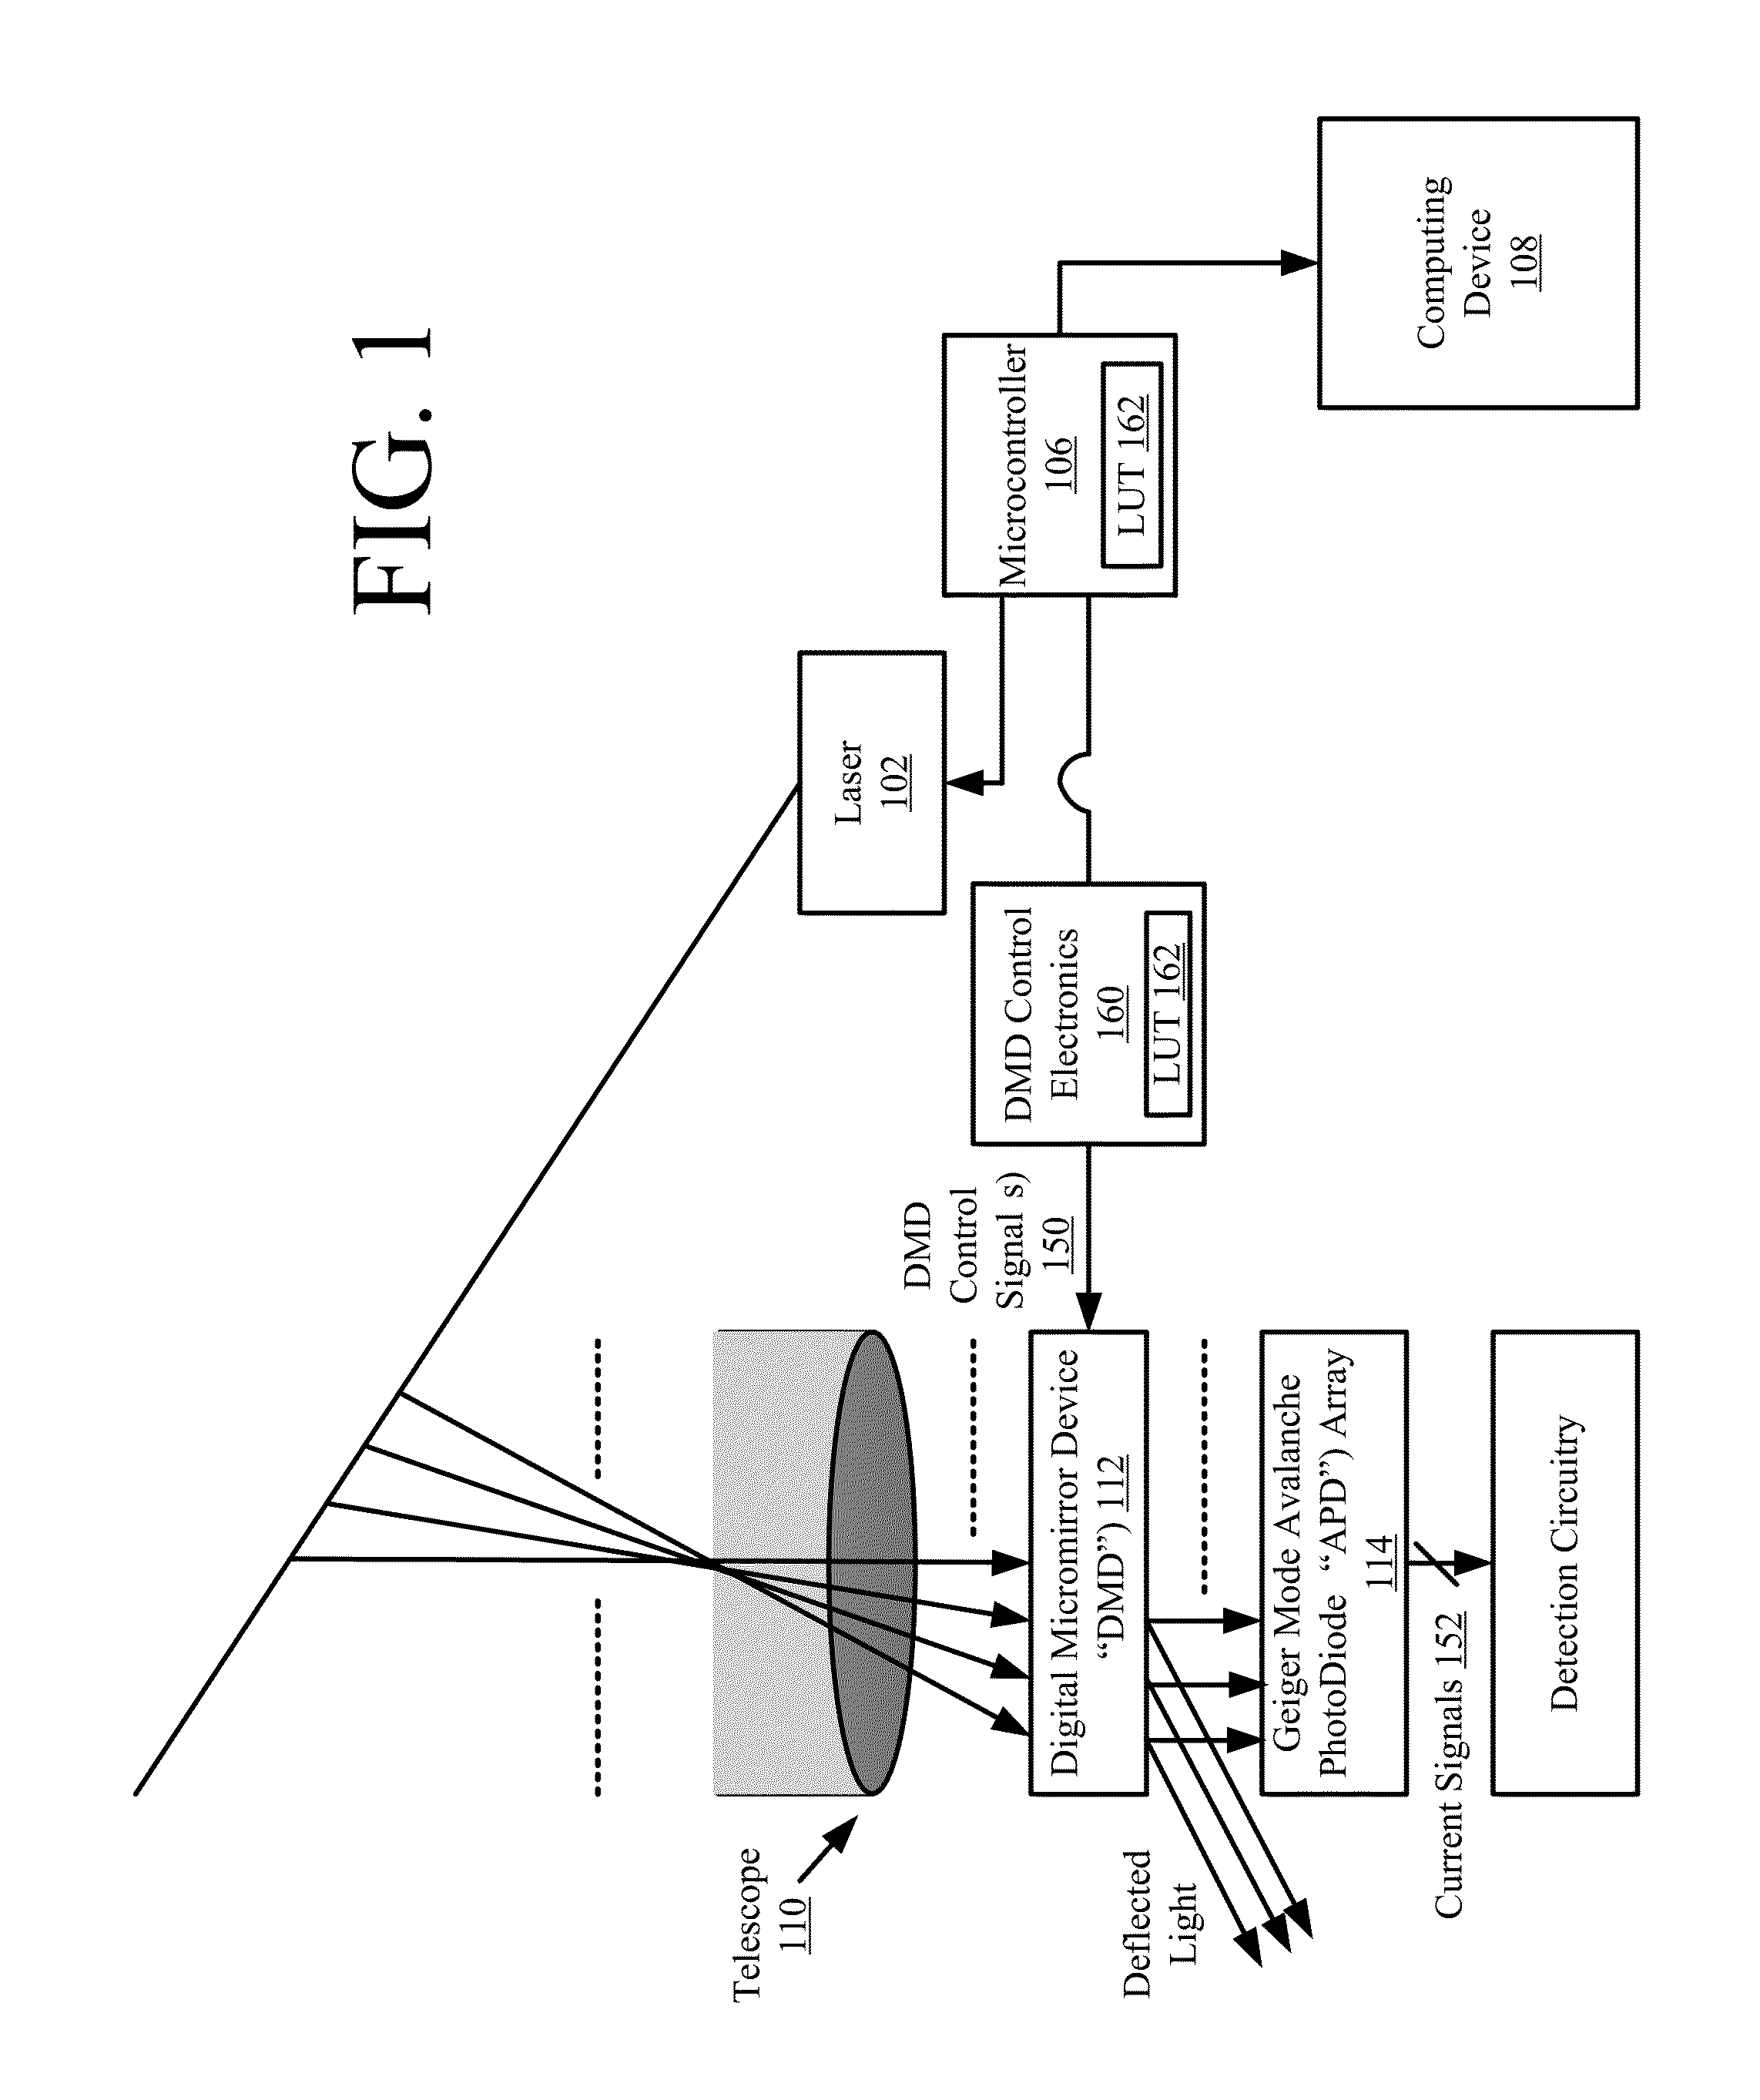 Modulation of input to geiger mode avalanche photodiode lidar using digital micromirror devices